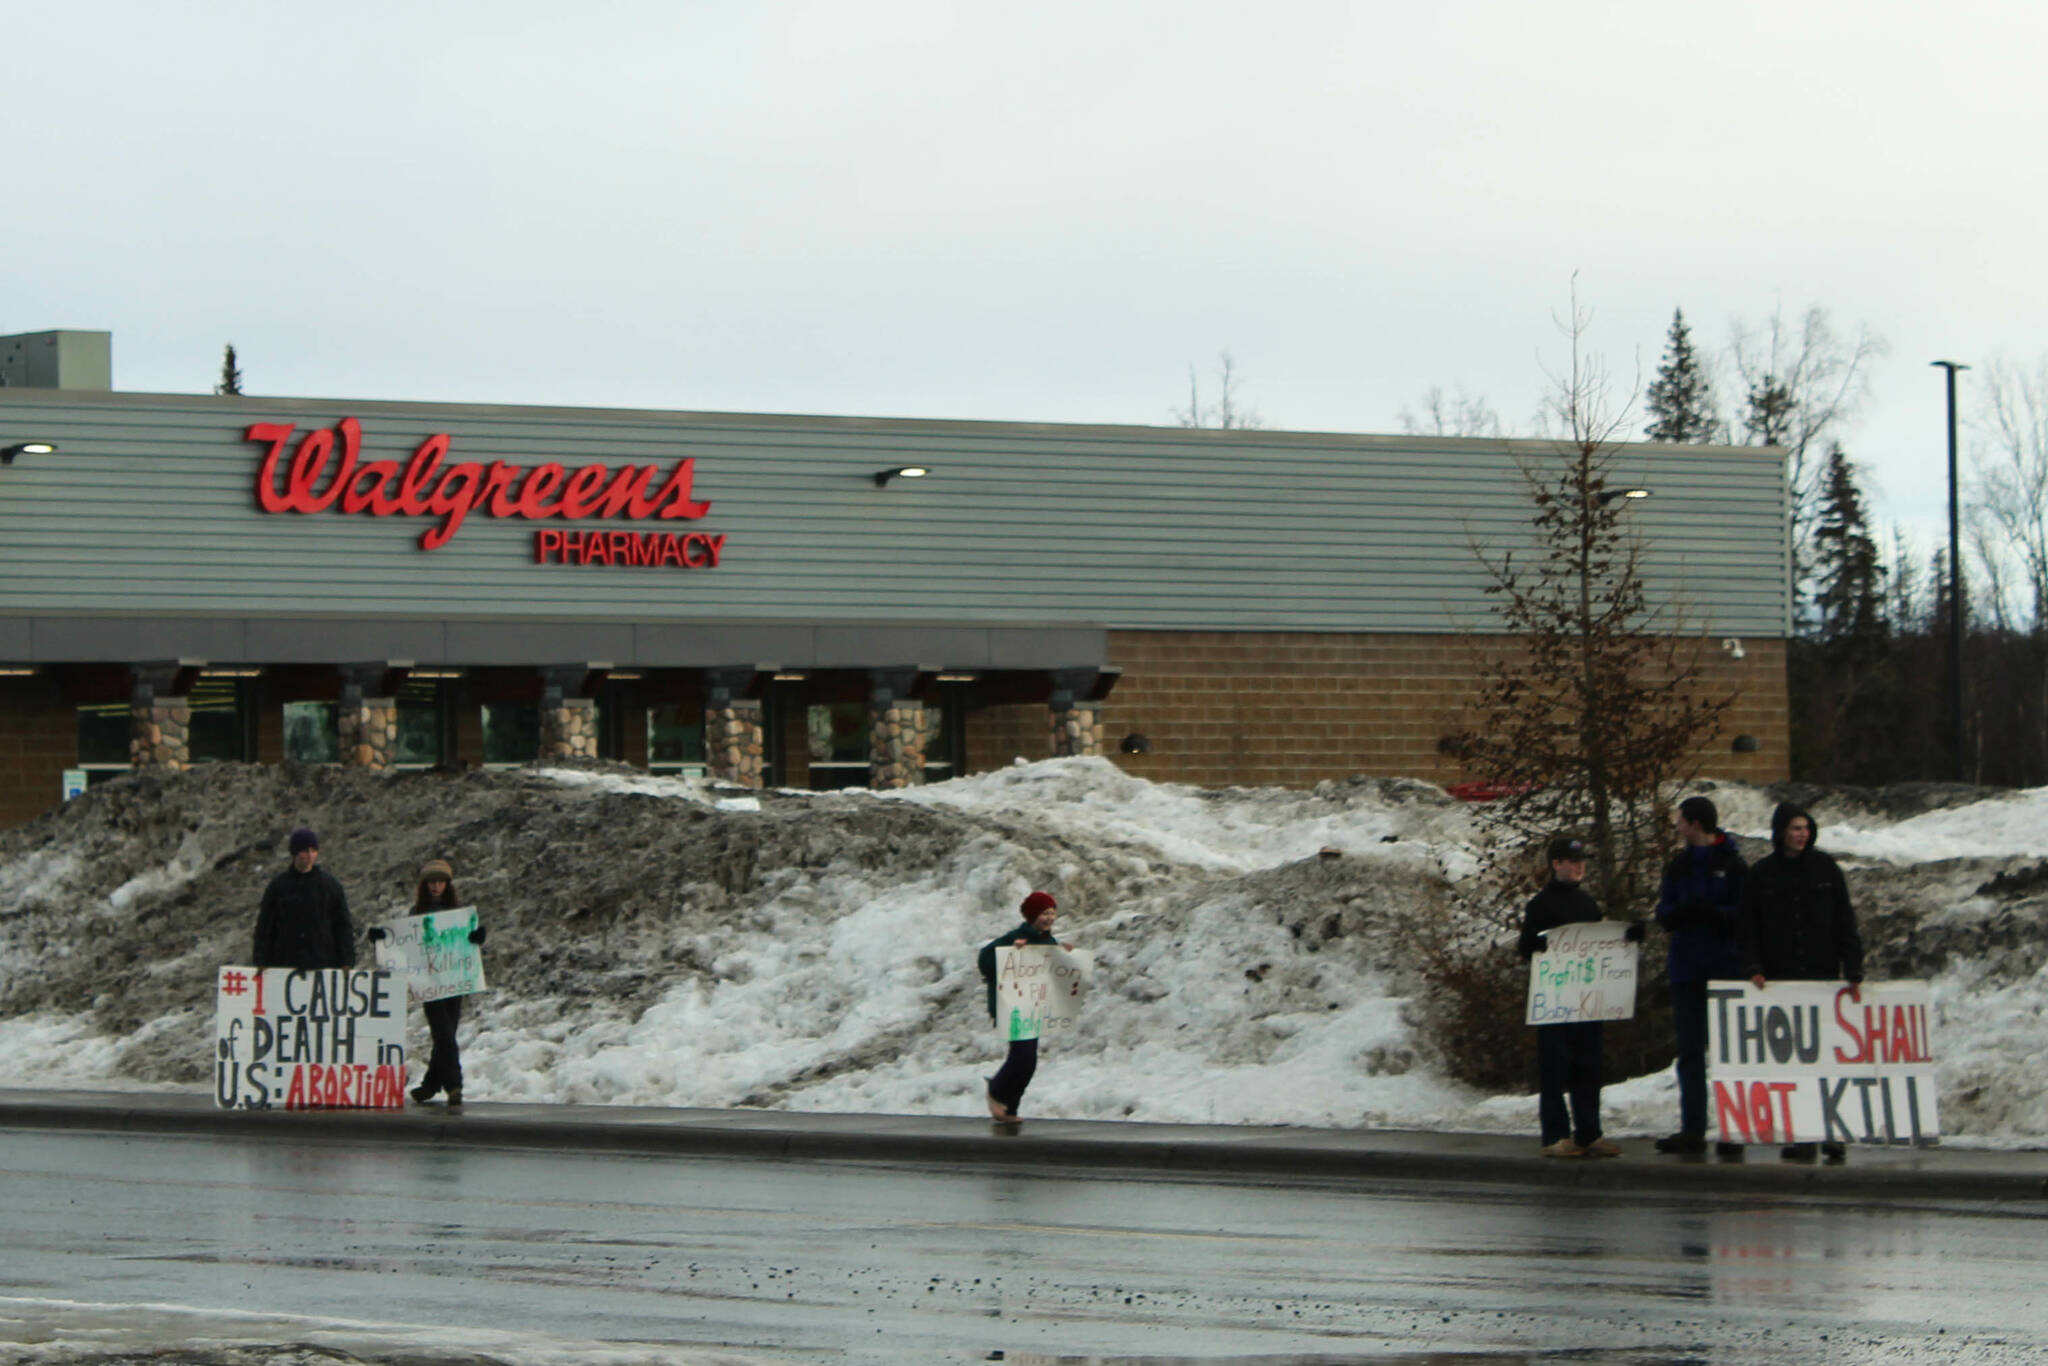 Demonstrators protest the sale of mifepristone outside of Walgreens in Soldotna on Tuesday, March 27, 2024 in Soldotna, Alaska. (Ashlyn O'Hara/Peninsula Clarion)